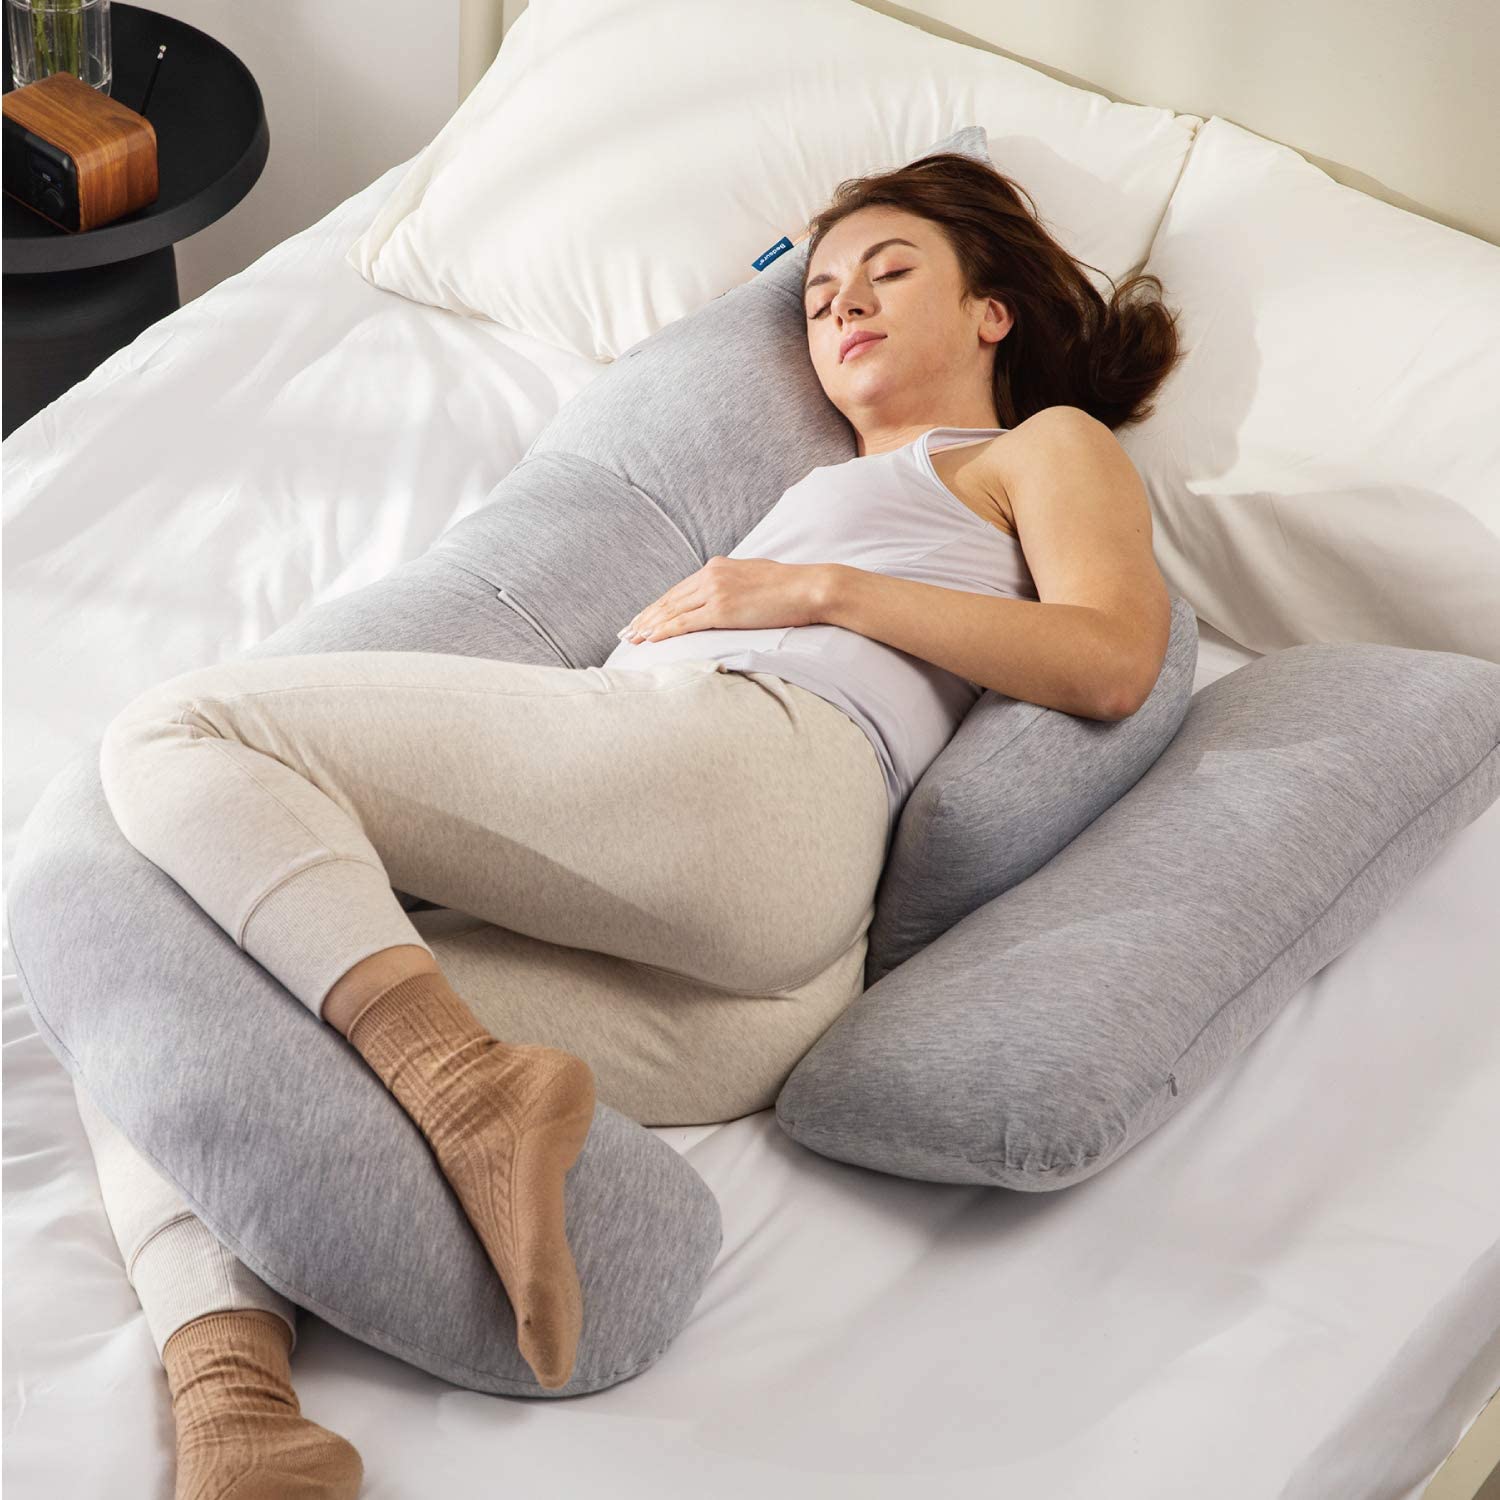 Bedsure H-Shaped Adjustable Pregnancy Body Pillow for $22.50 + Free Shipping